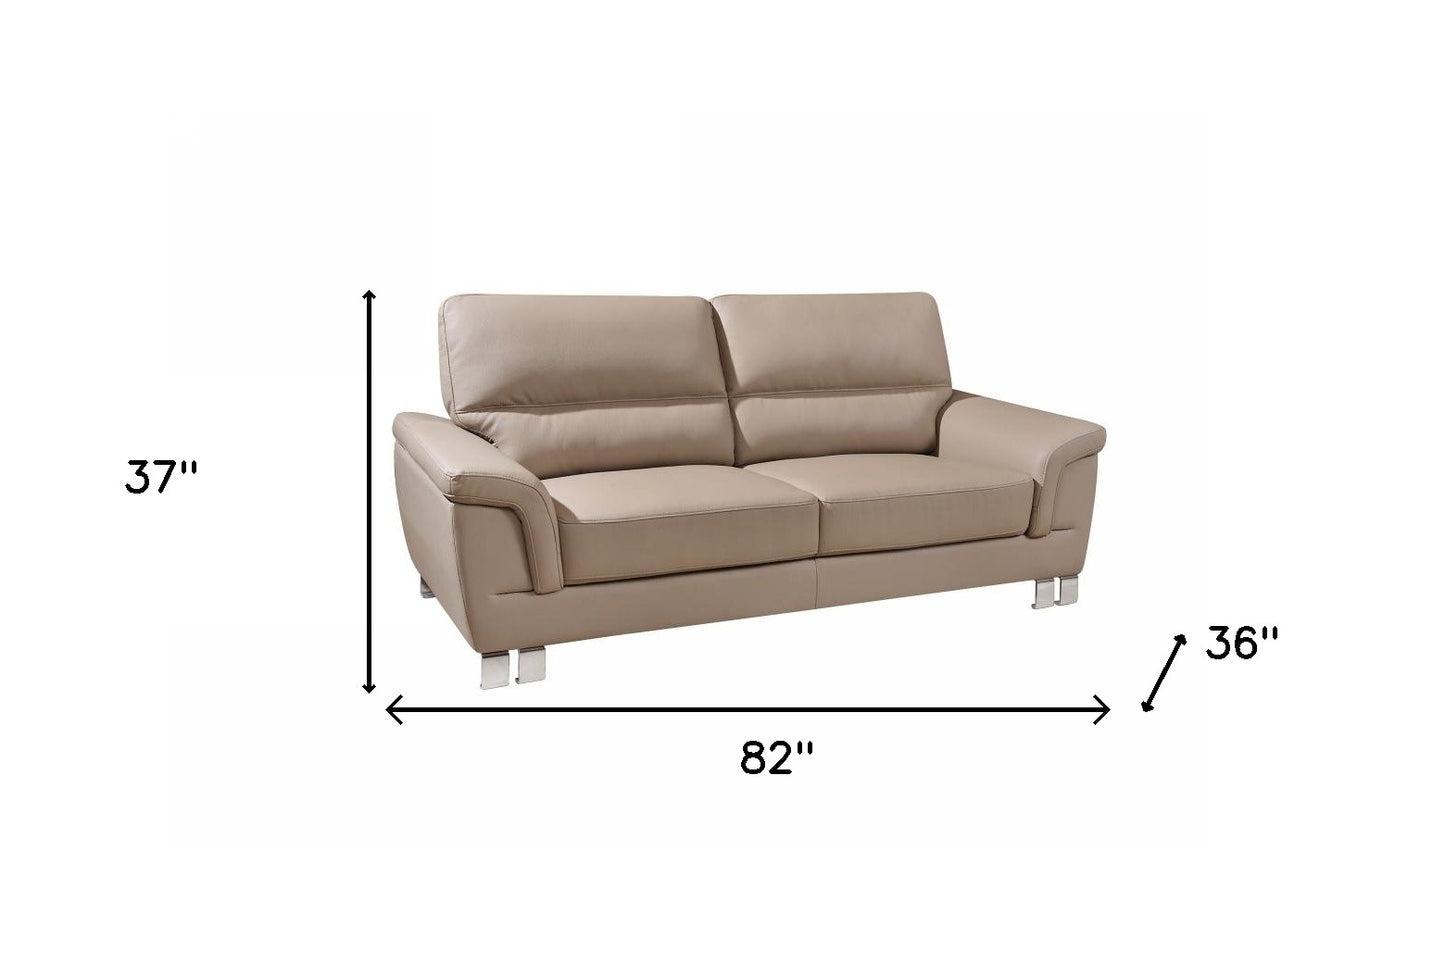 82" Beige And Silver Faux Leather Sofa